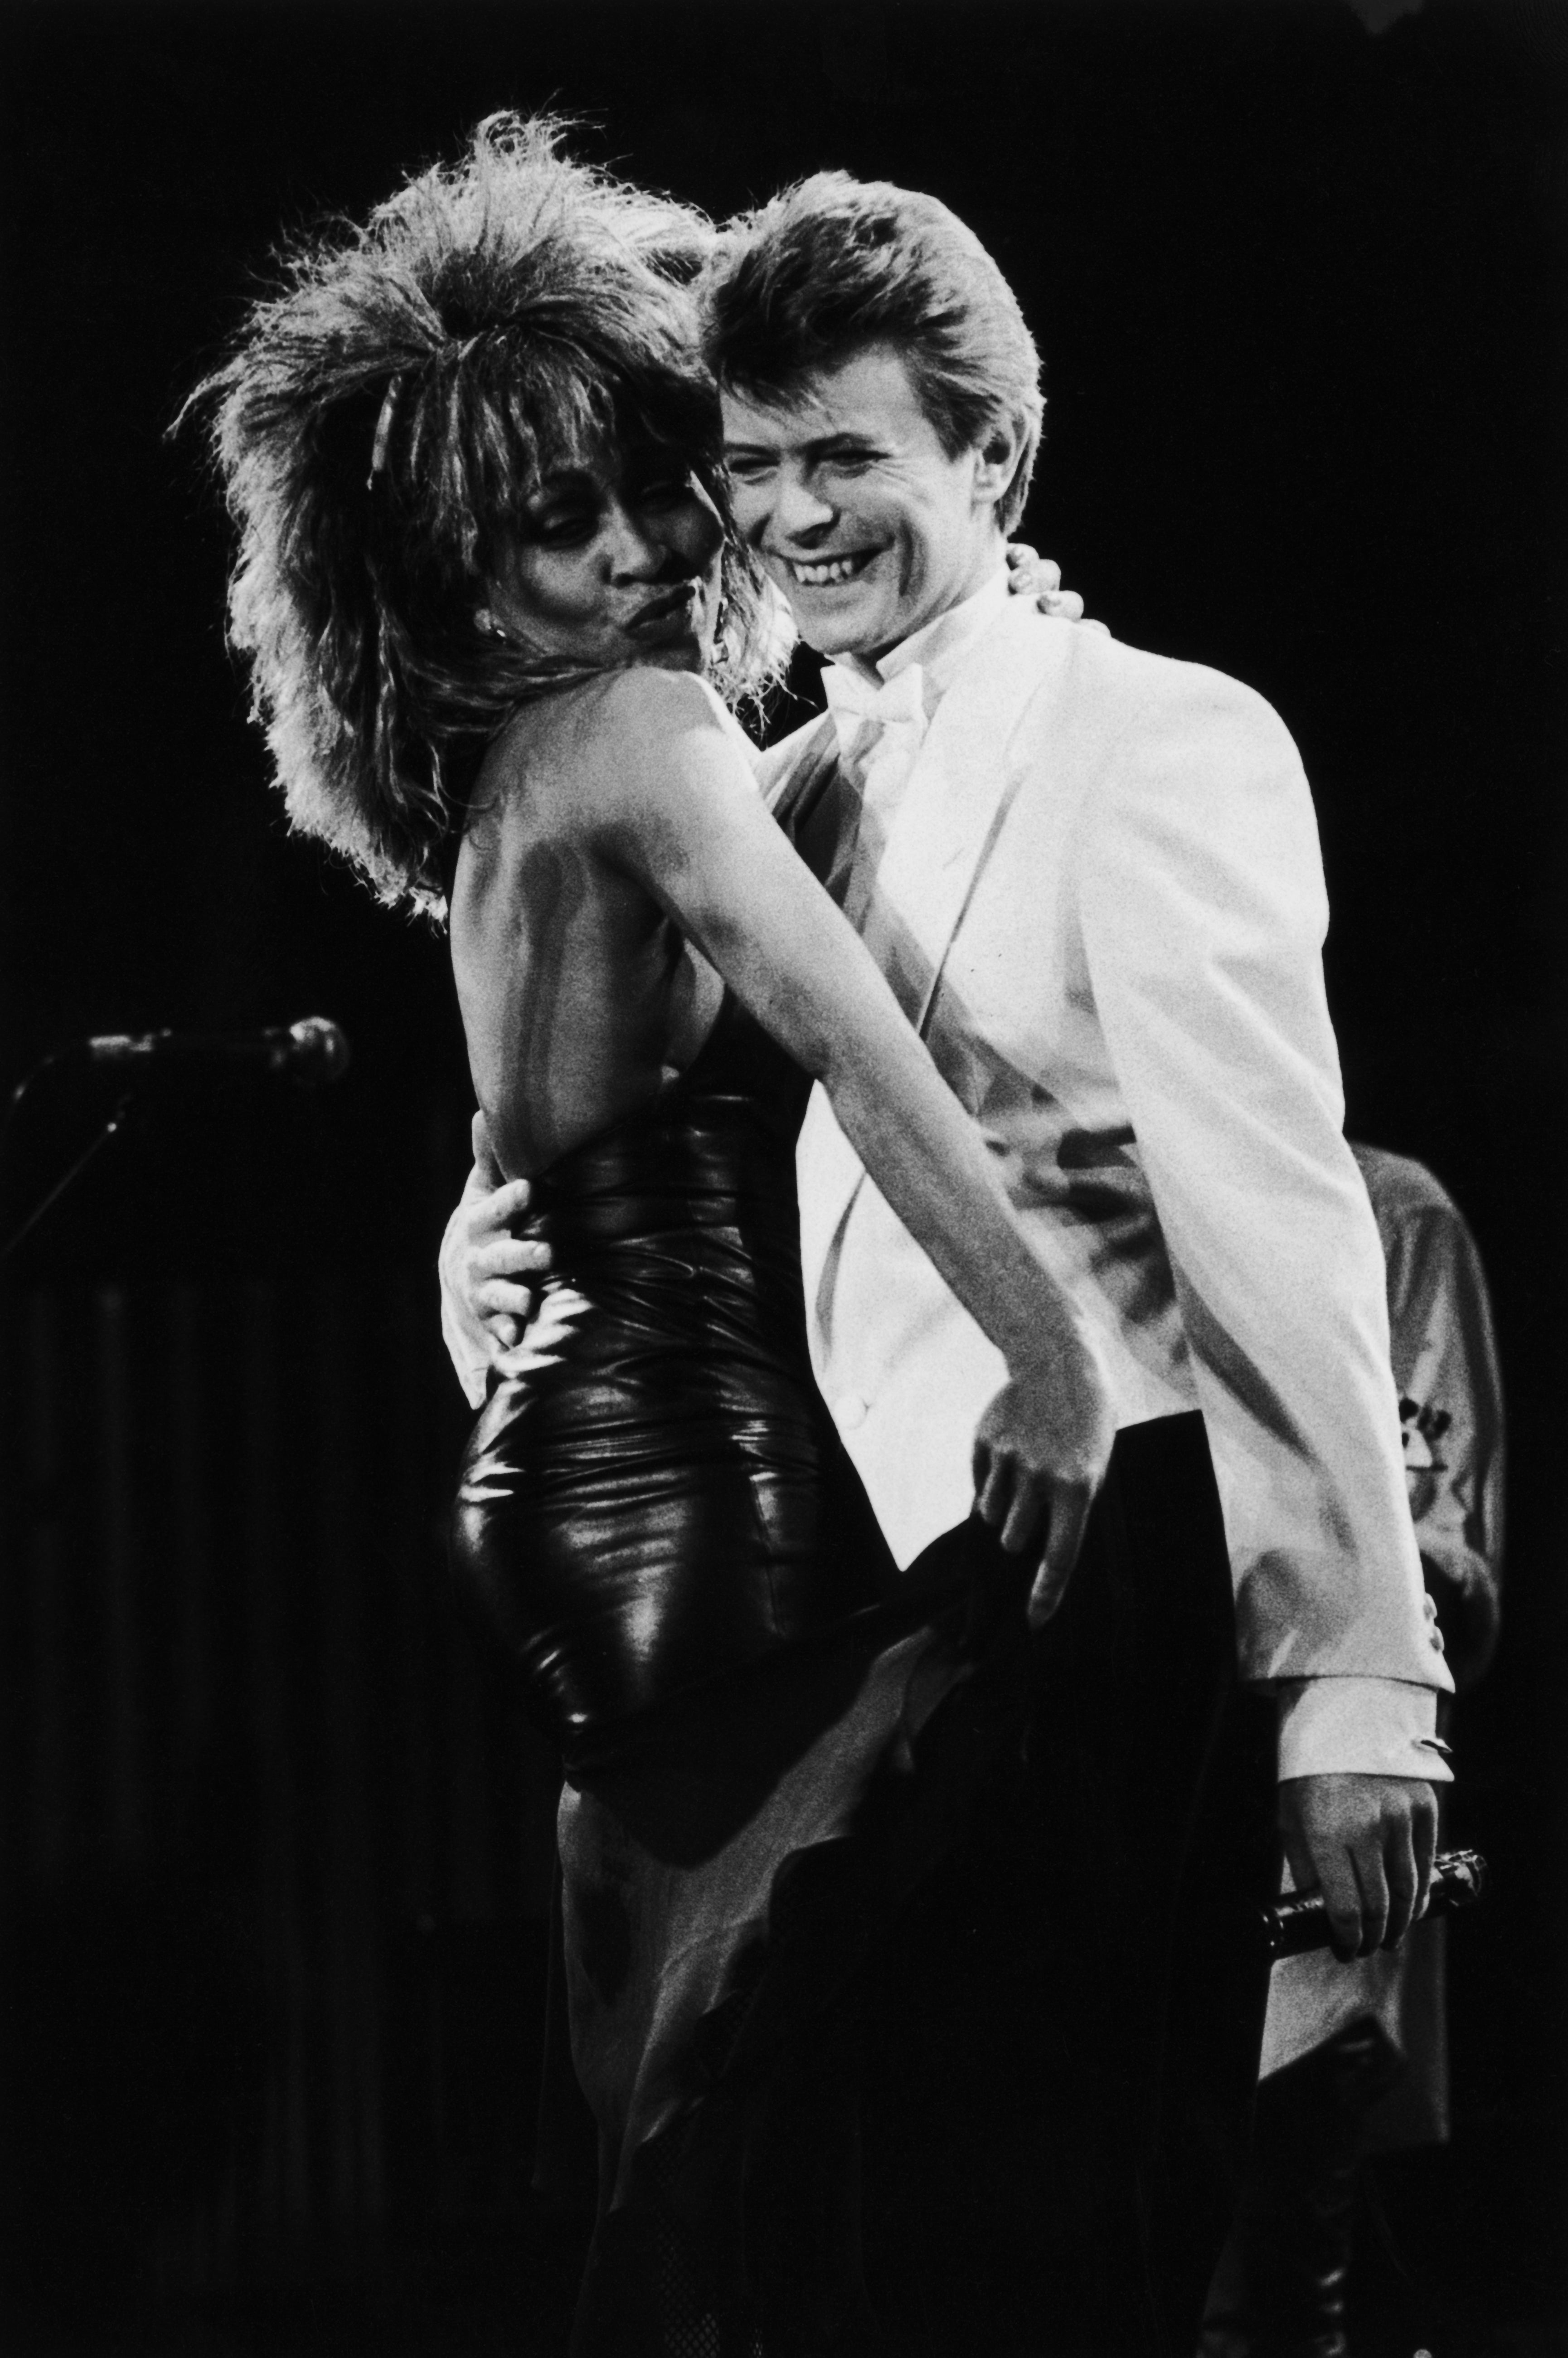 On stage with David Bowie in 1985